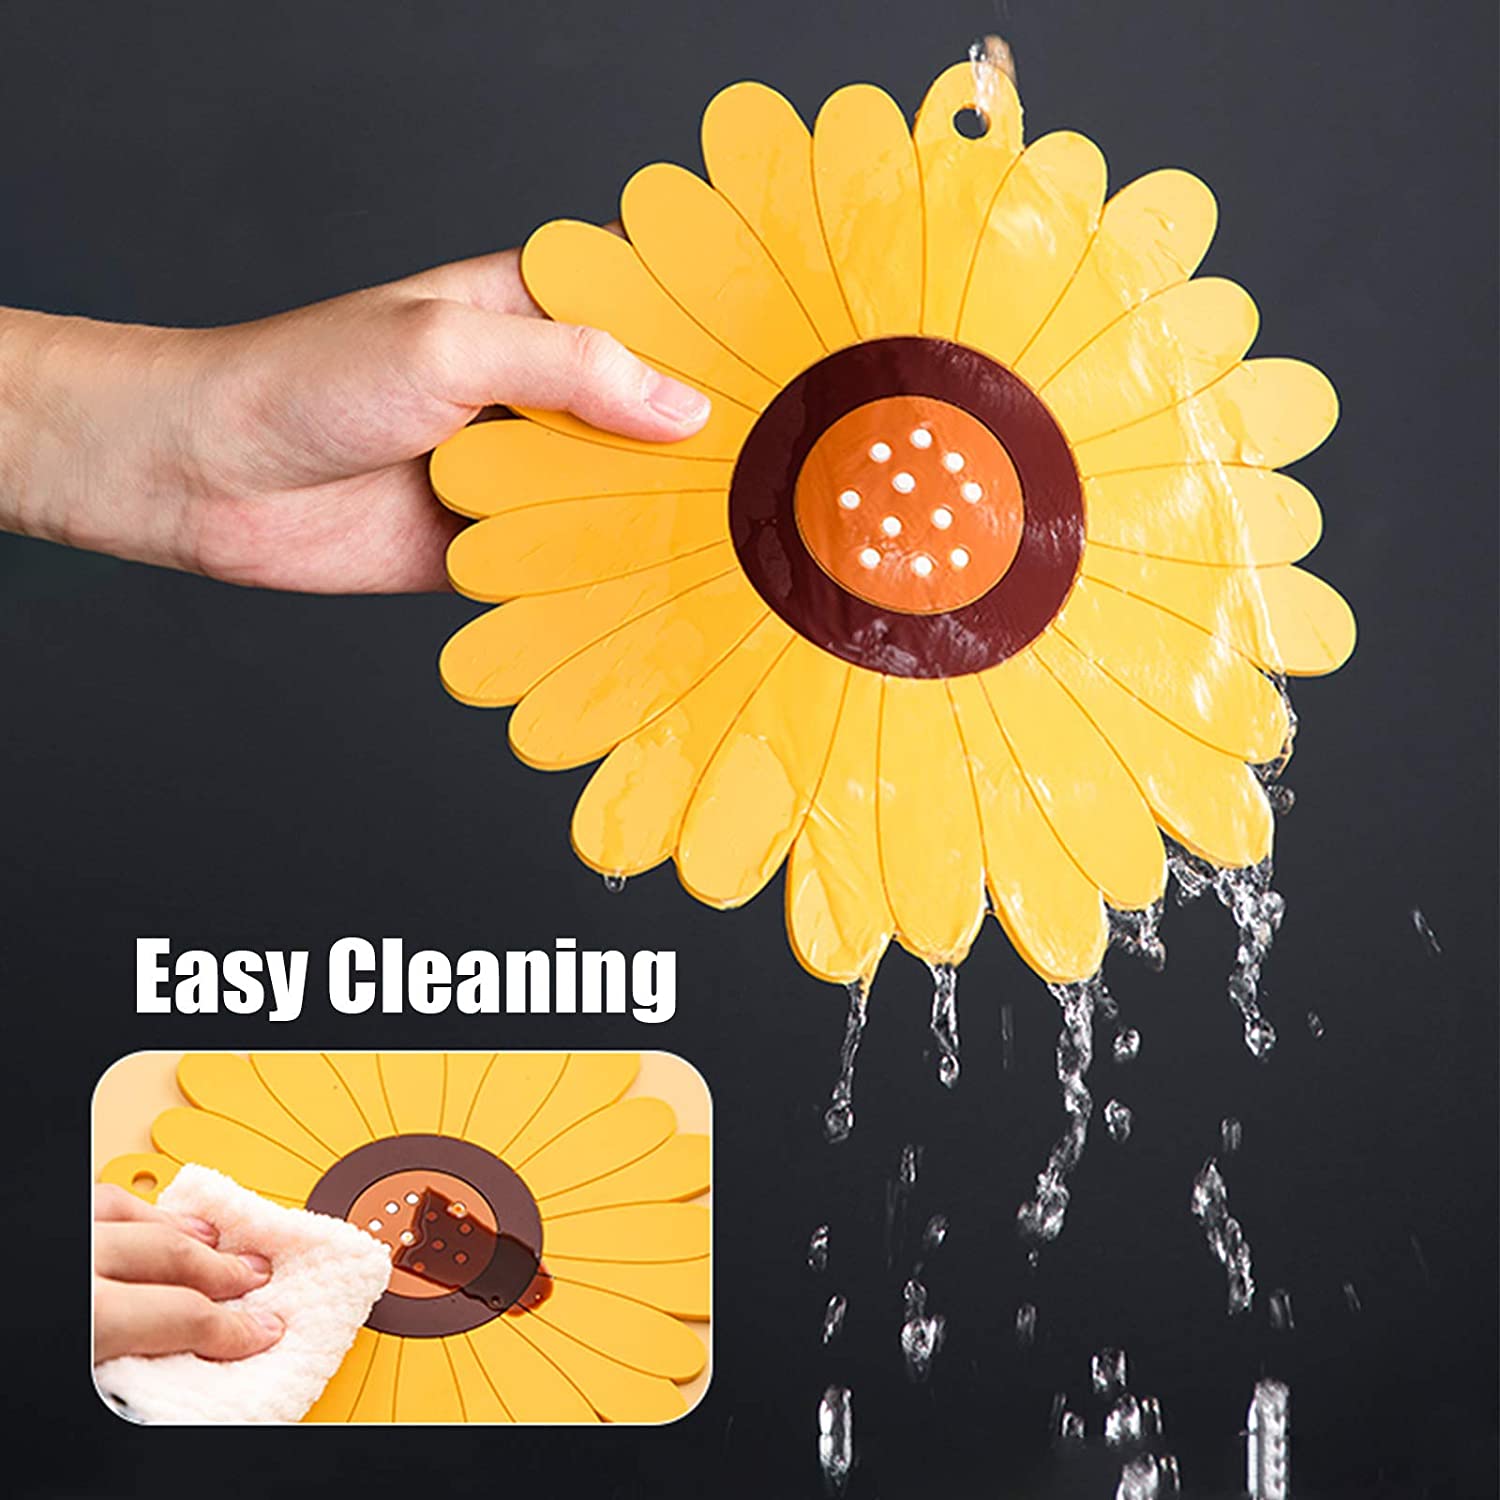 (🎄Christmas Sale - 48% OFF) 🌻Sunflower Insulation Pad, Buy 4 Get Extra 20% OFF NOW